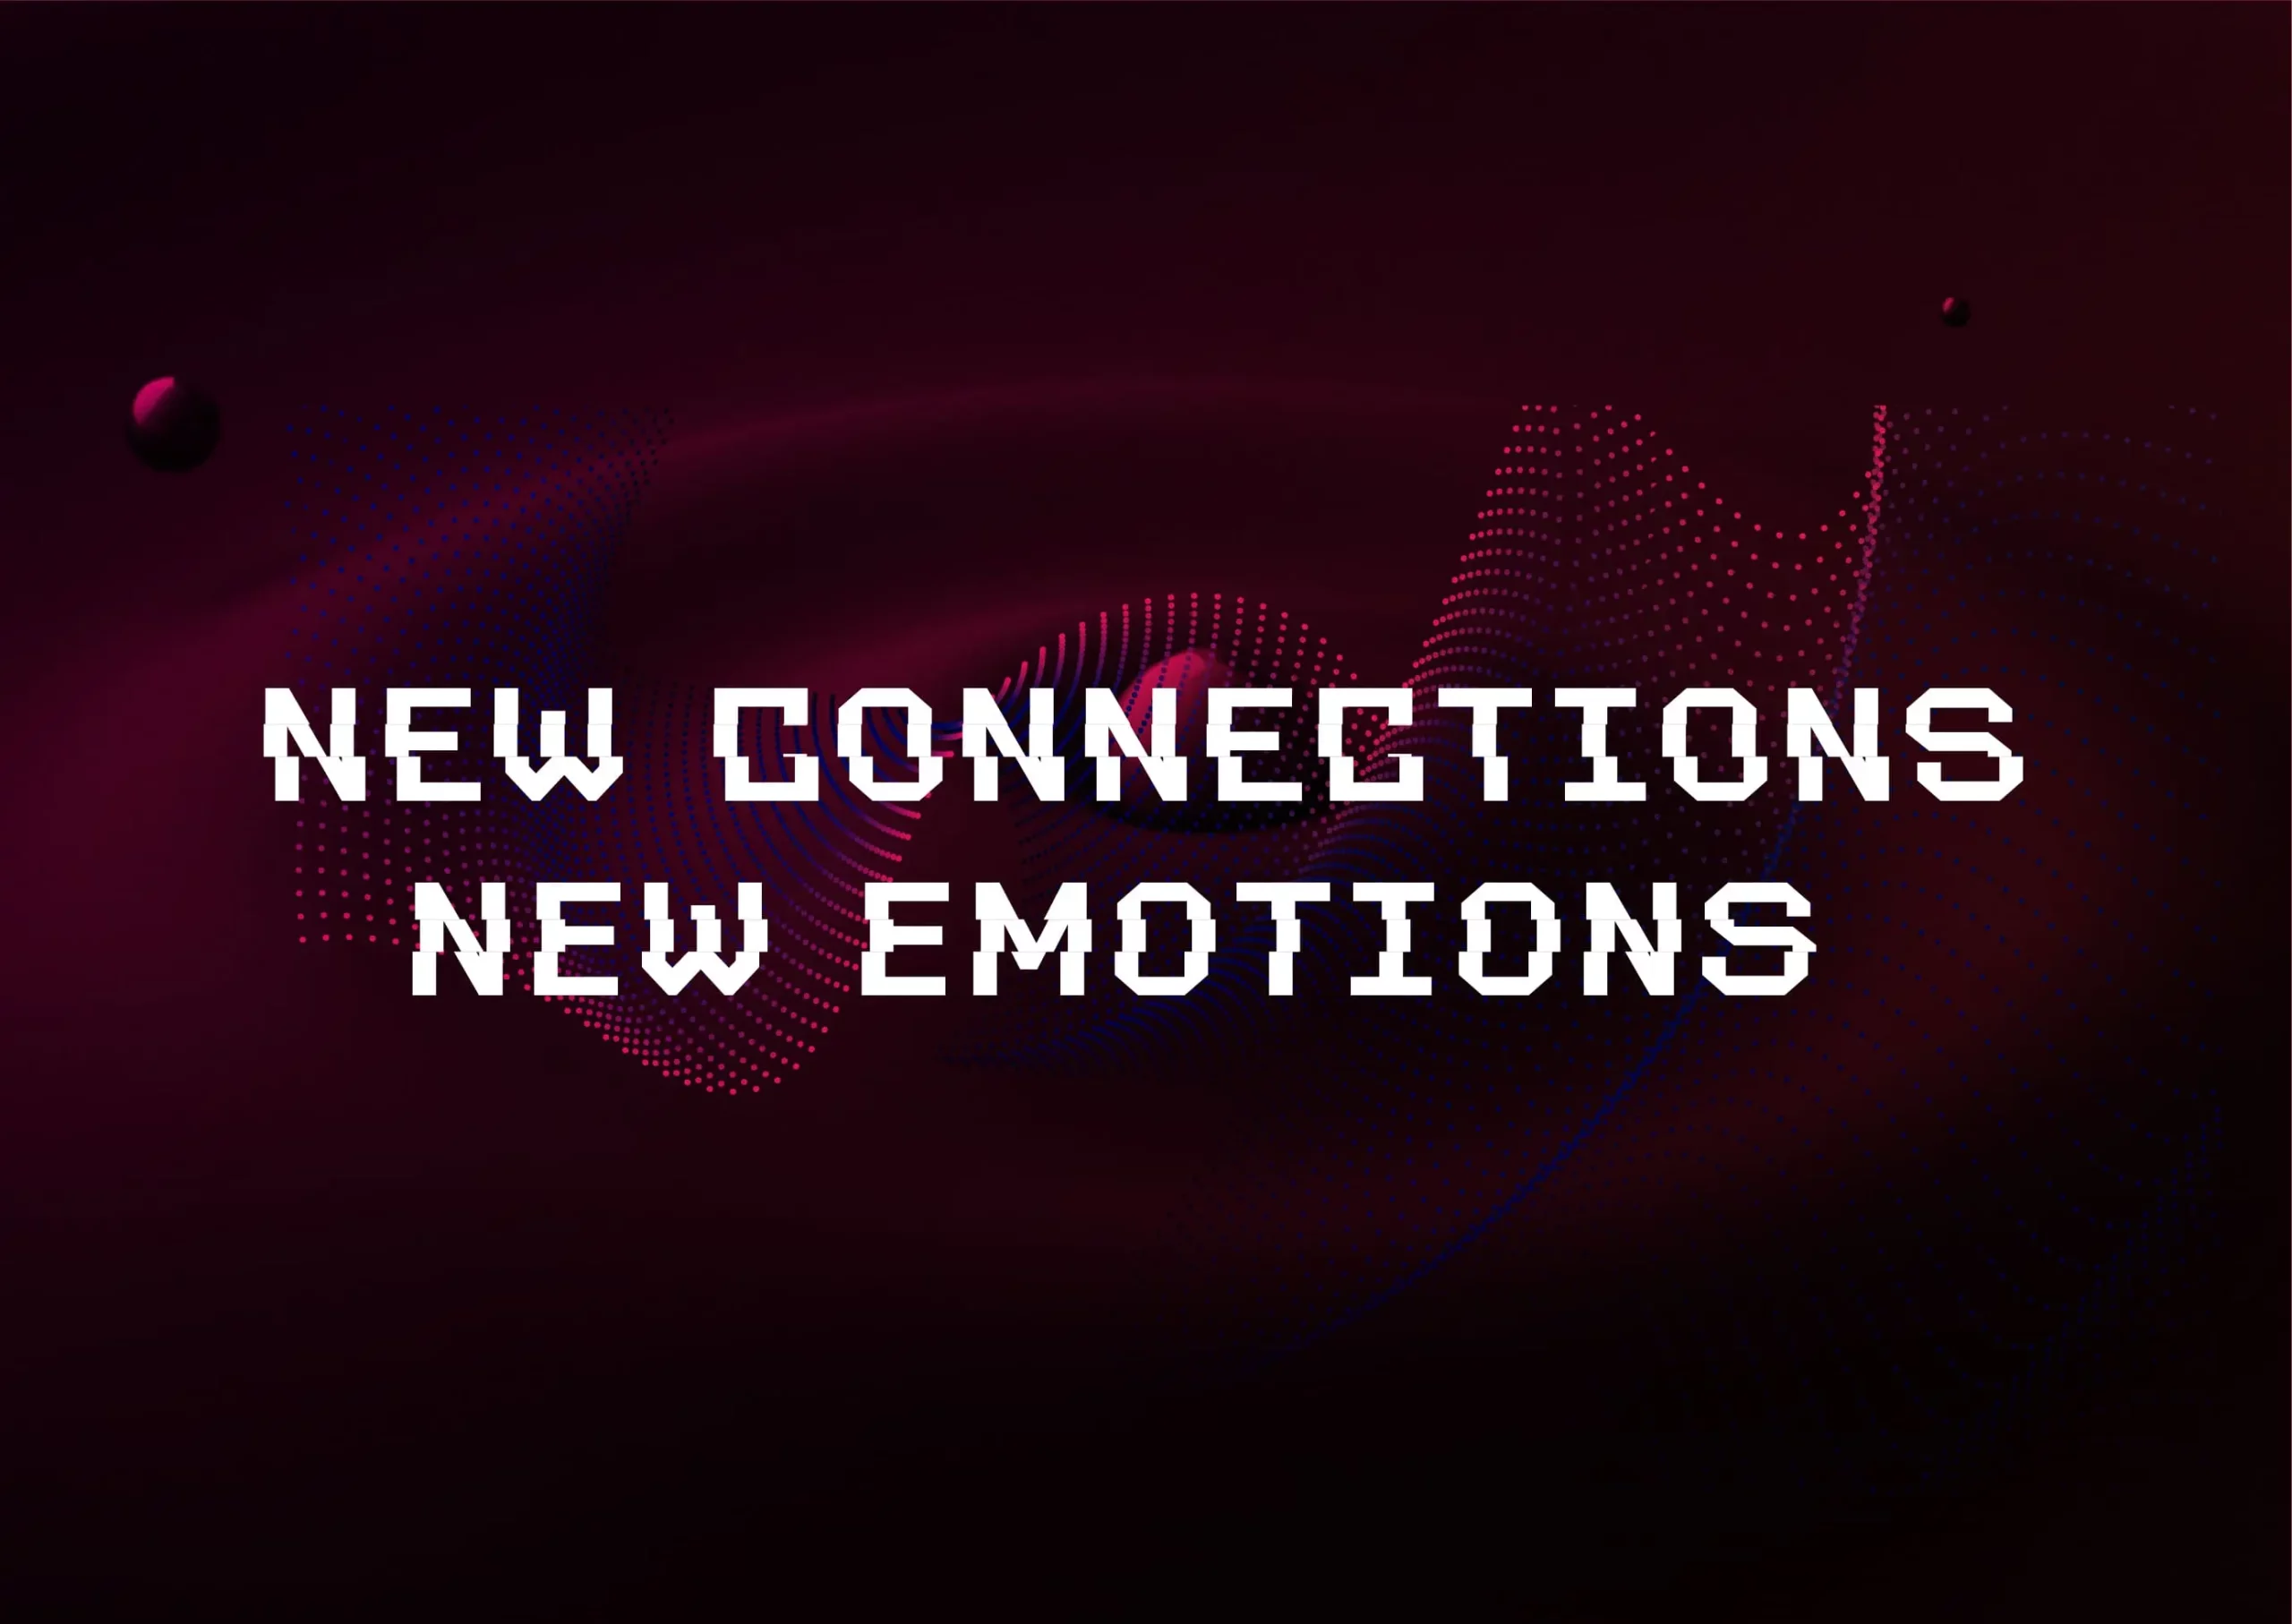 New connections new emotions.